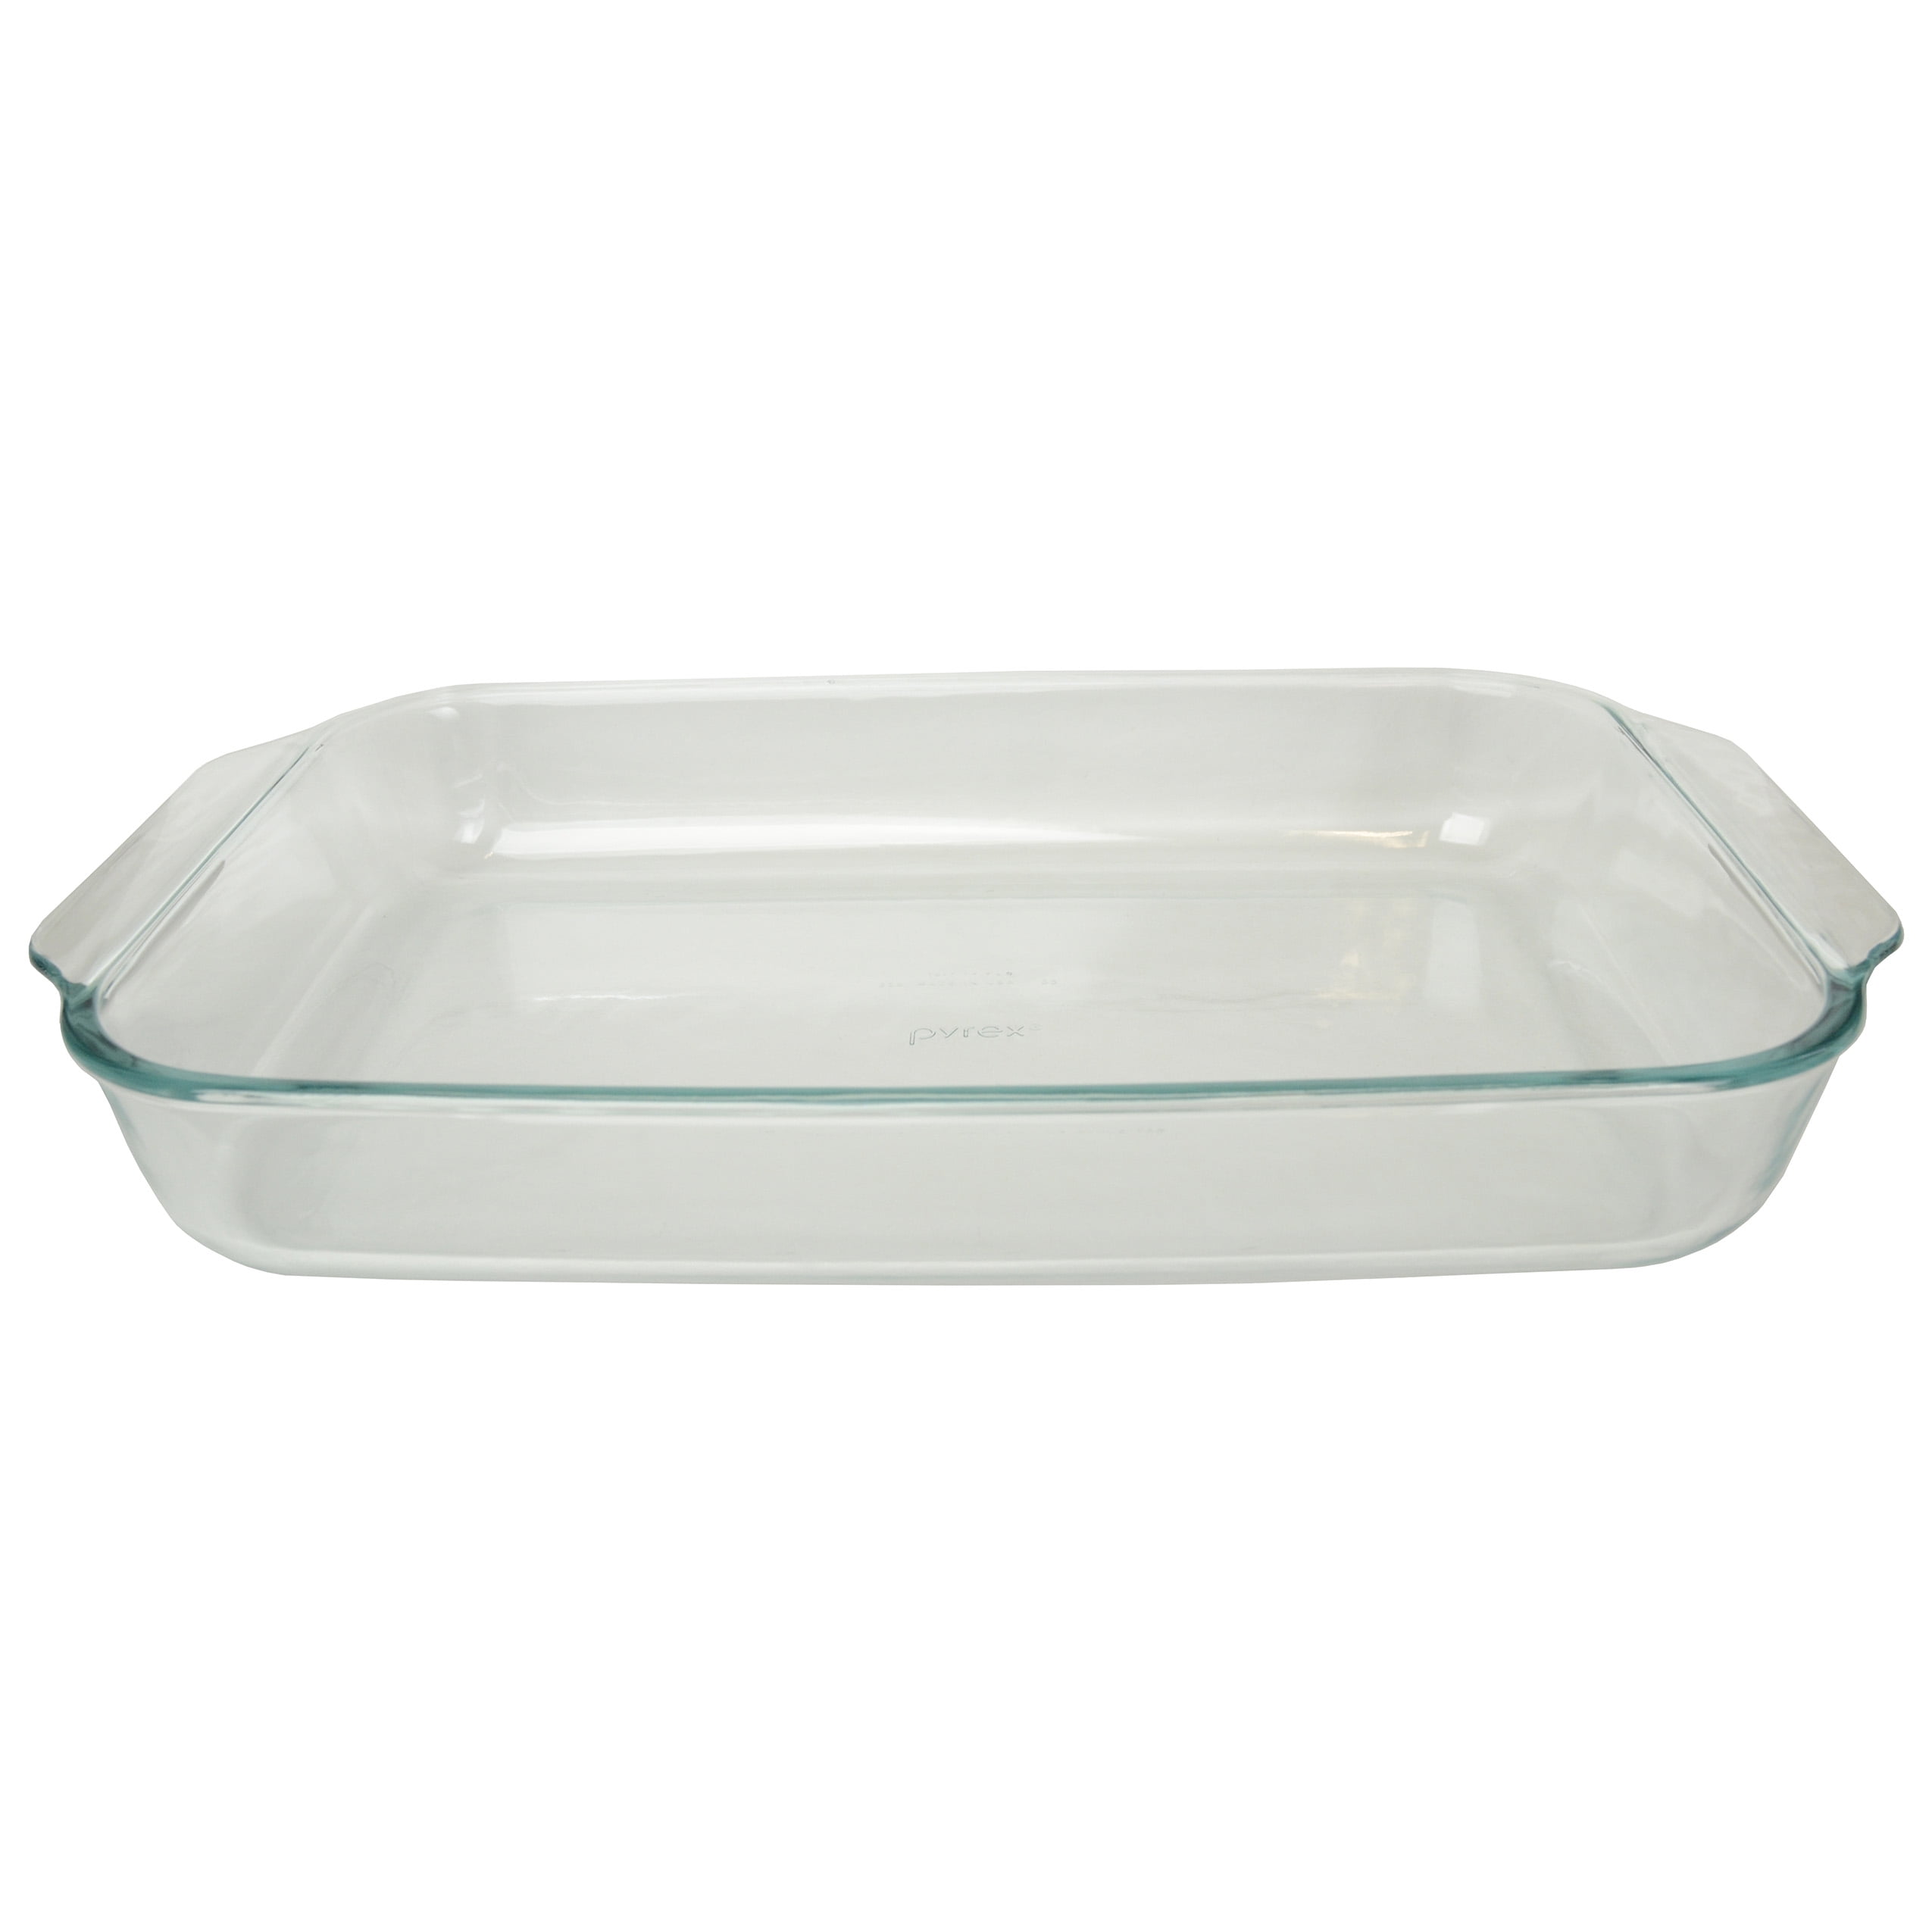 Pyrex (1) 233 3qt Glass Baking Dish and (1) 233-PC Red Plastic Lid